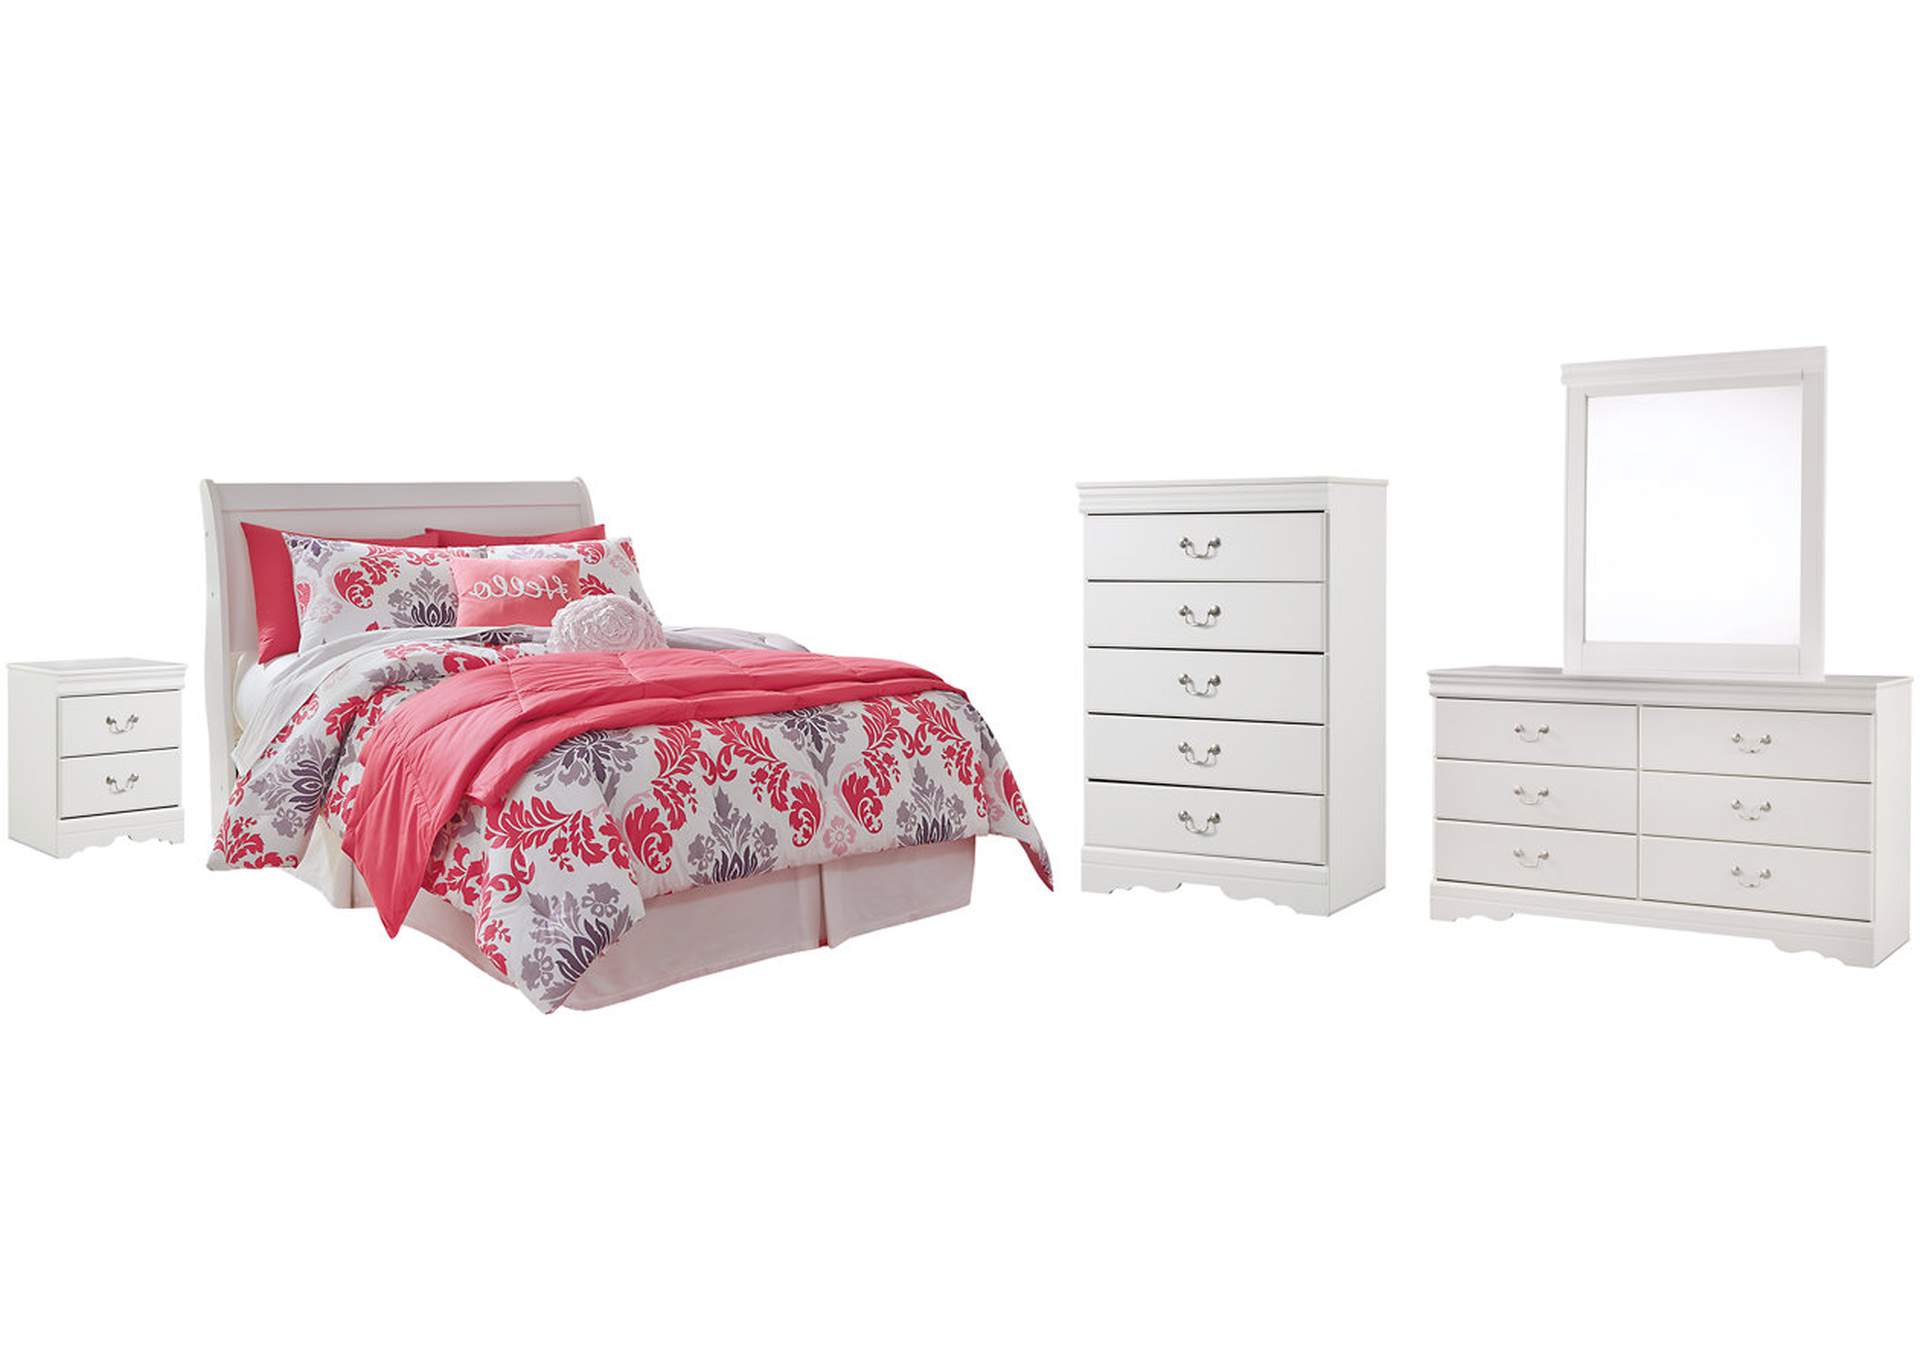 Anarasia Full Sleigh Headboard Bed with Mirrored Dresser, Chest and Nightstand,Signature Design By Ashley